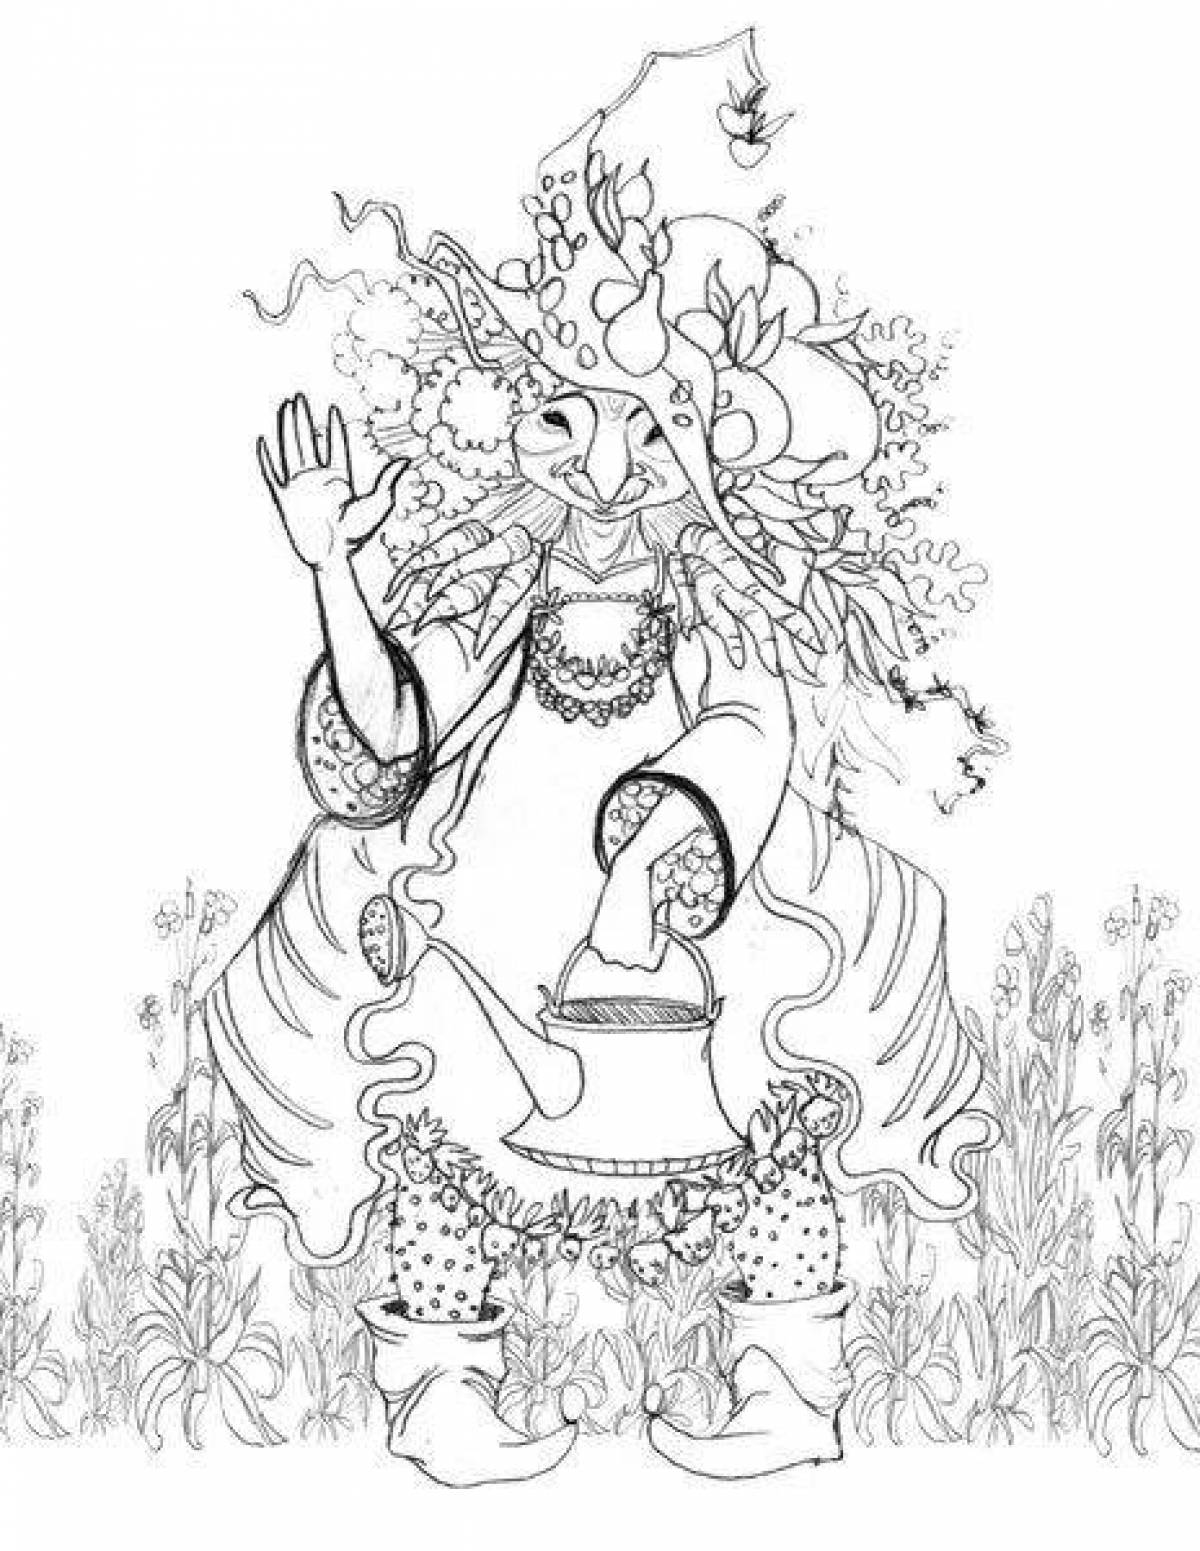 Inspirational coloring book based on Bazhov's fairy tales